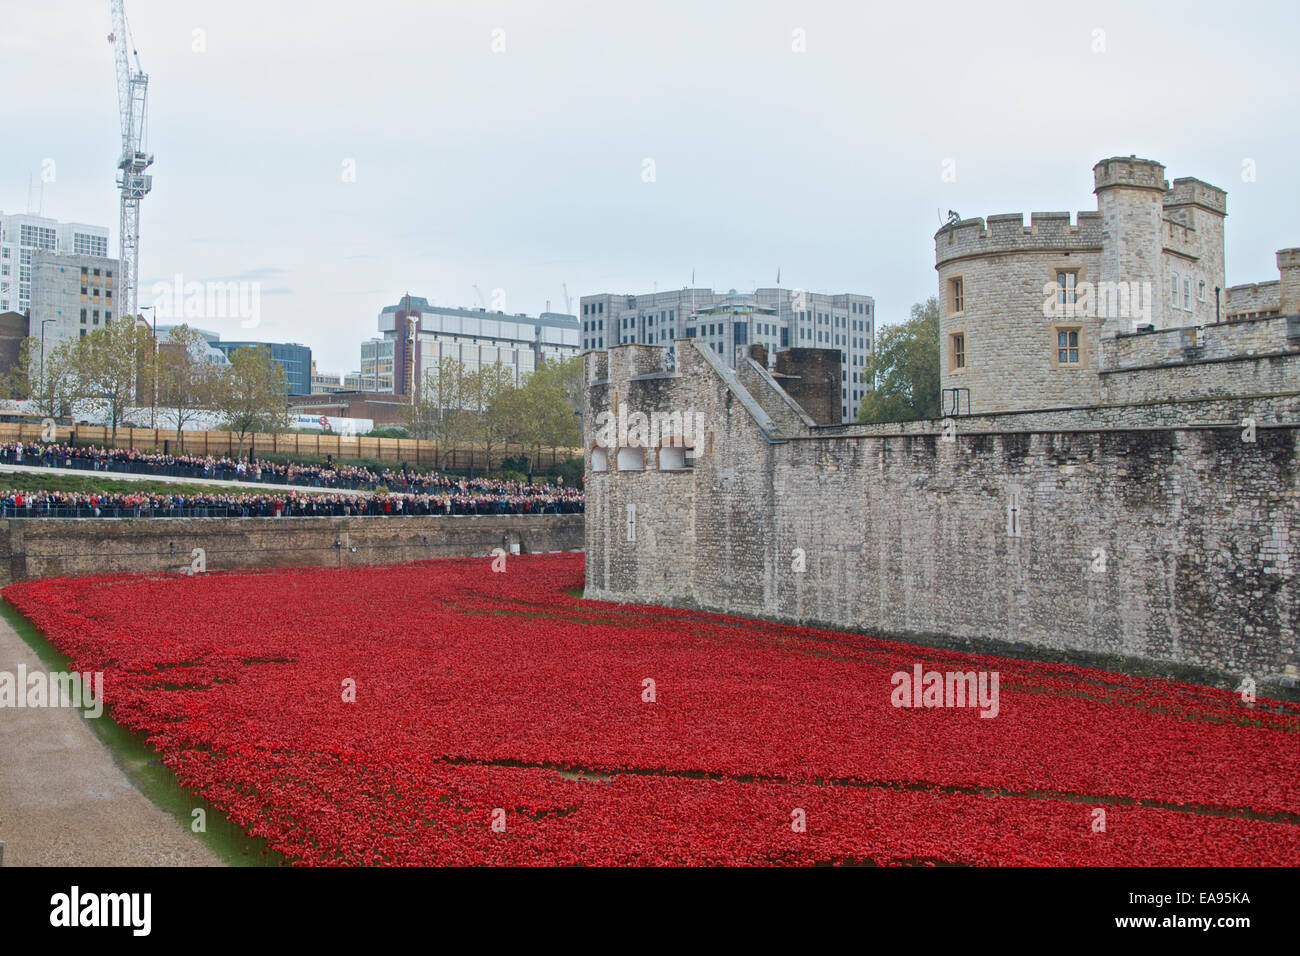 Crowds applaud following the two minute silence on the morning of Remembrance Sunday 9th November 2014 at the Tower of London where the moat is filled with commemorative poppies. The art instillation entitled Blood Swept Lands and Seas of Red which commemorates the centenary of the start of WW1 in 1914 has attracted millions of visitors. Stock Photo